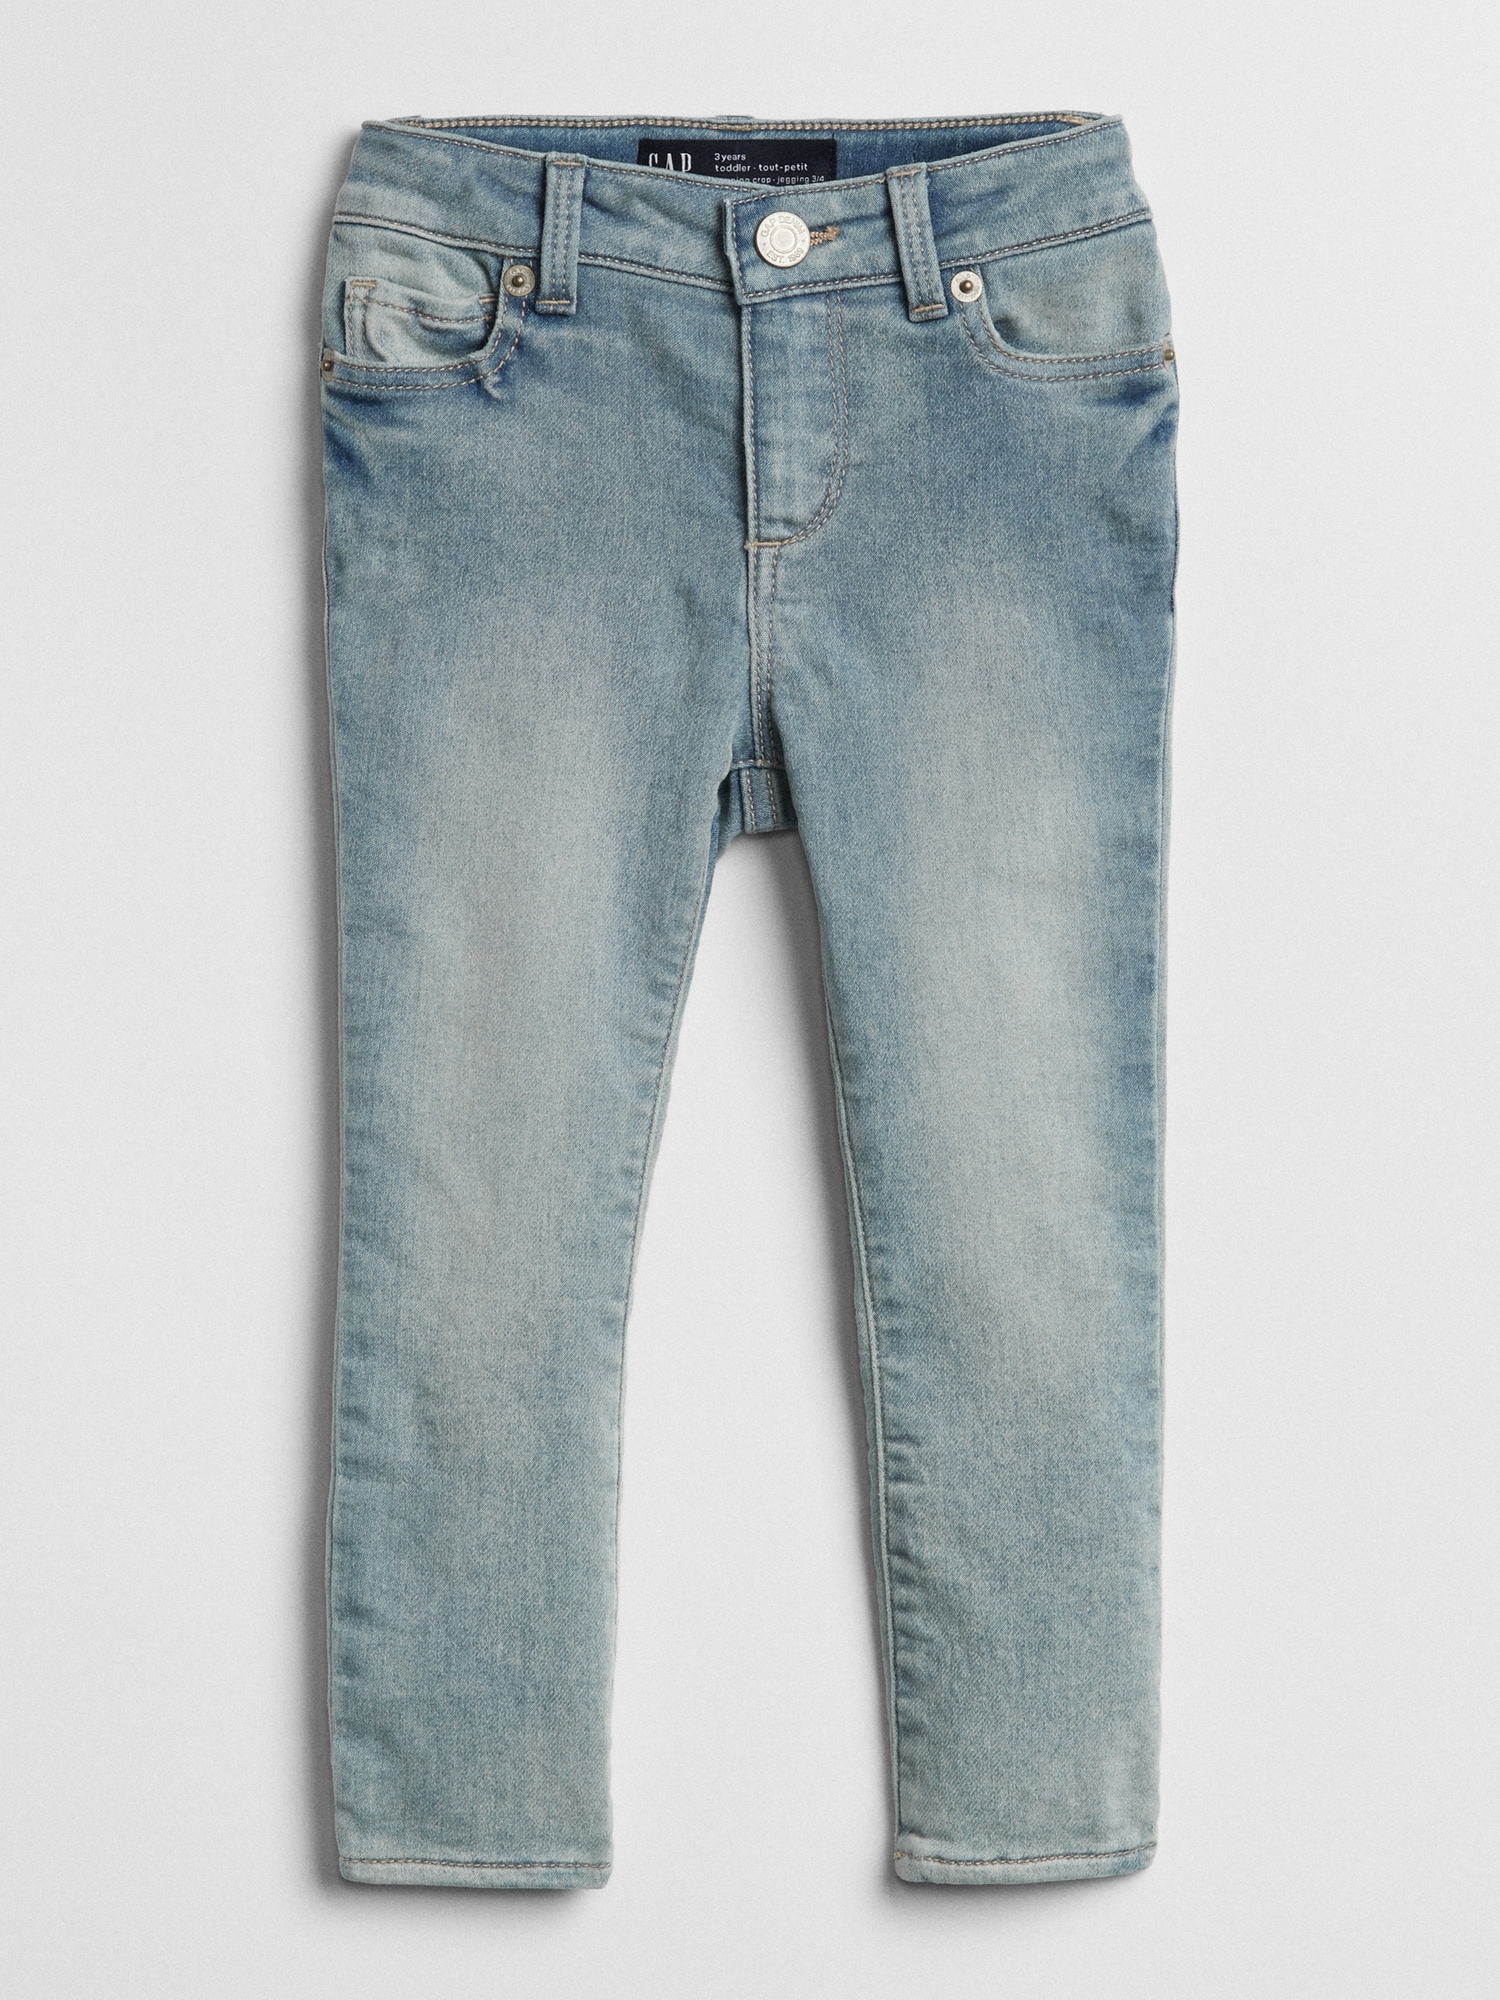 Toddler Skinny Jeans with Stretch | Gap